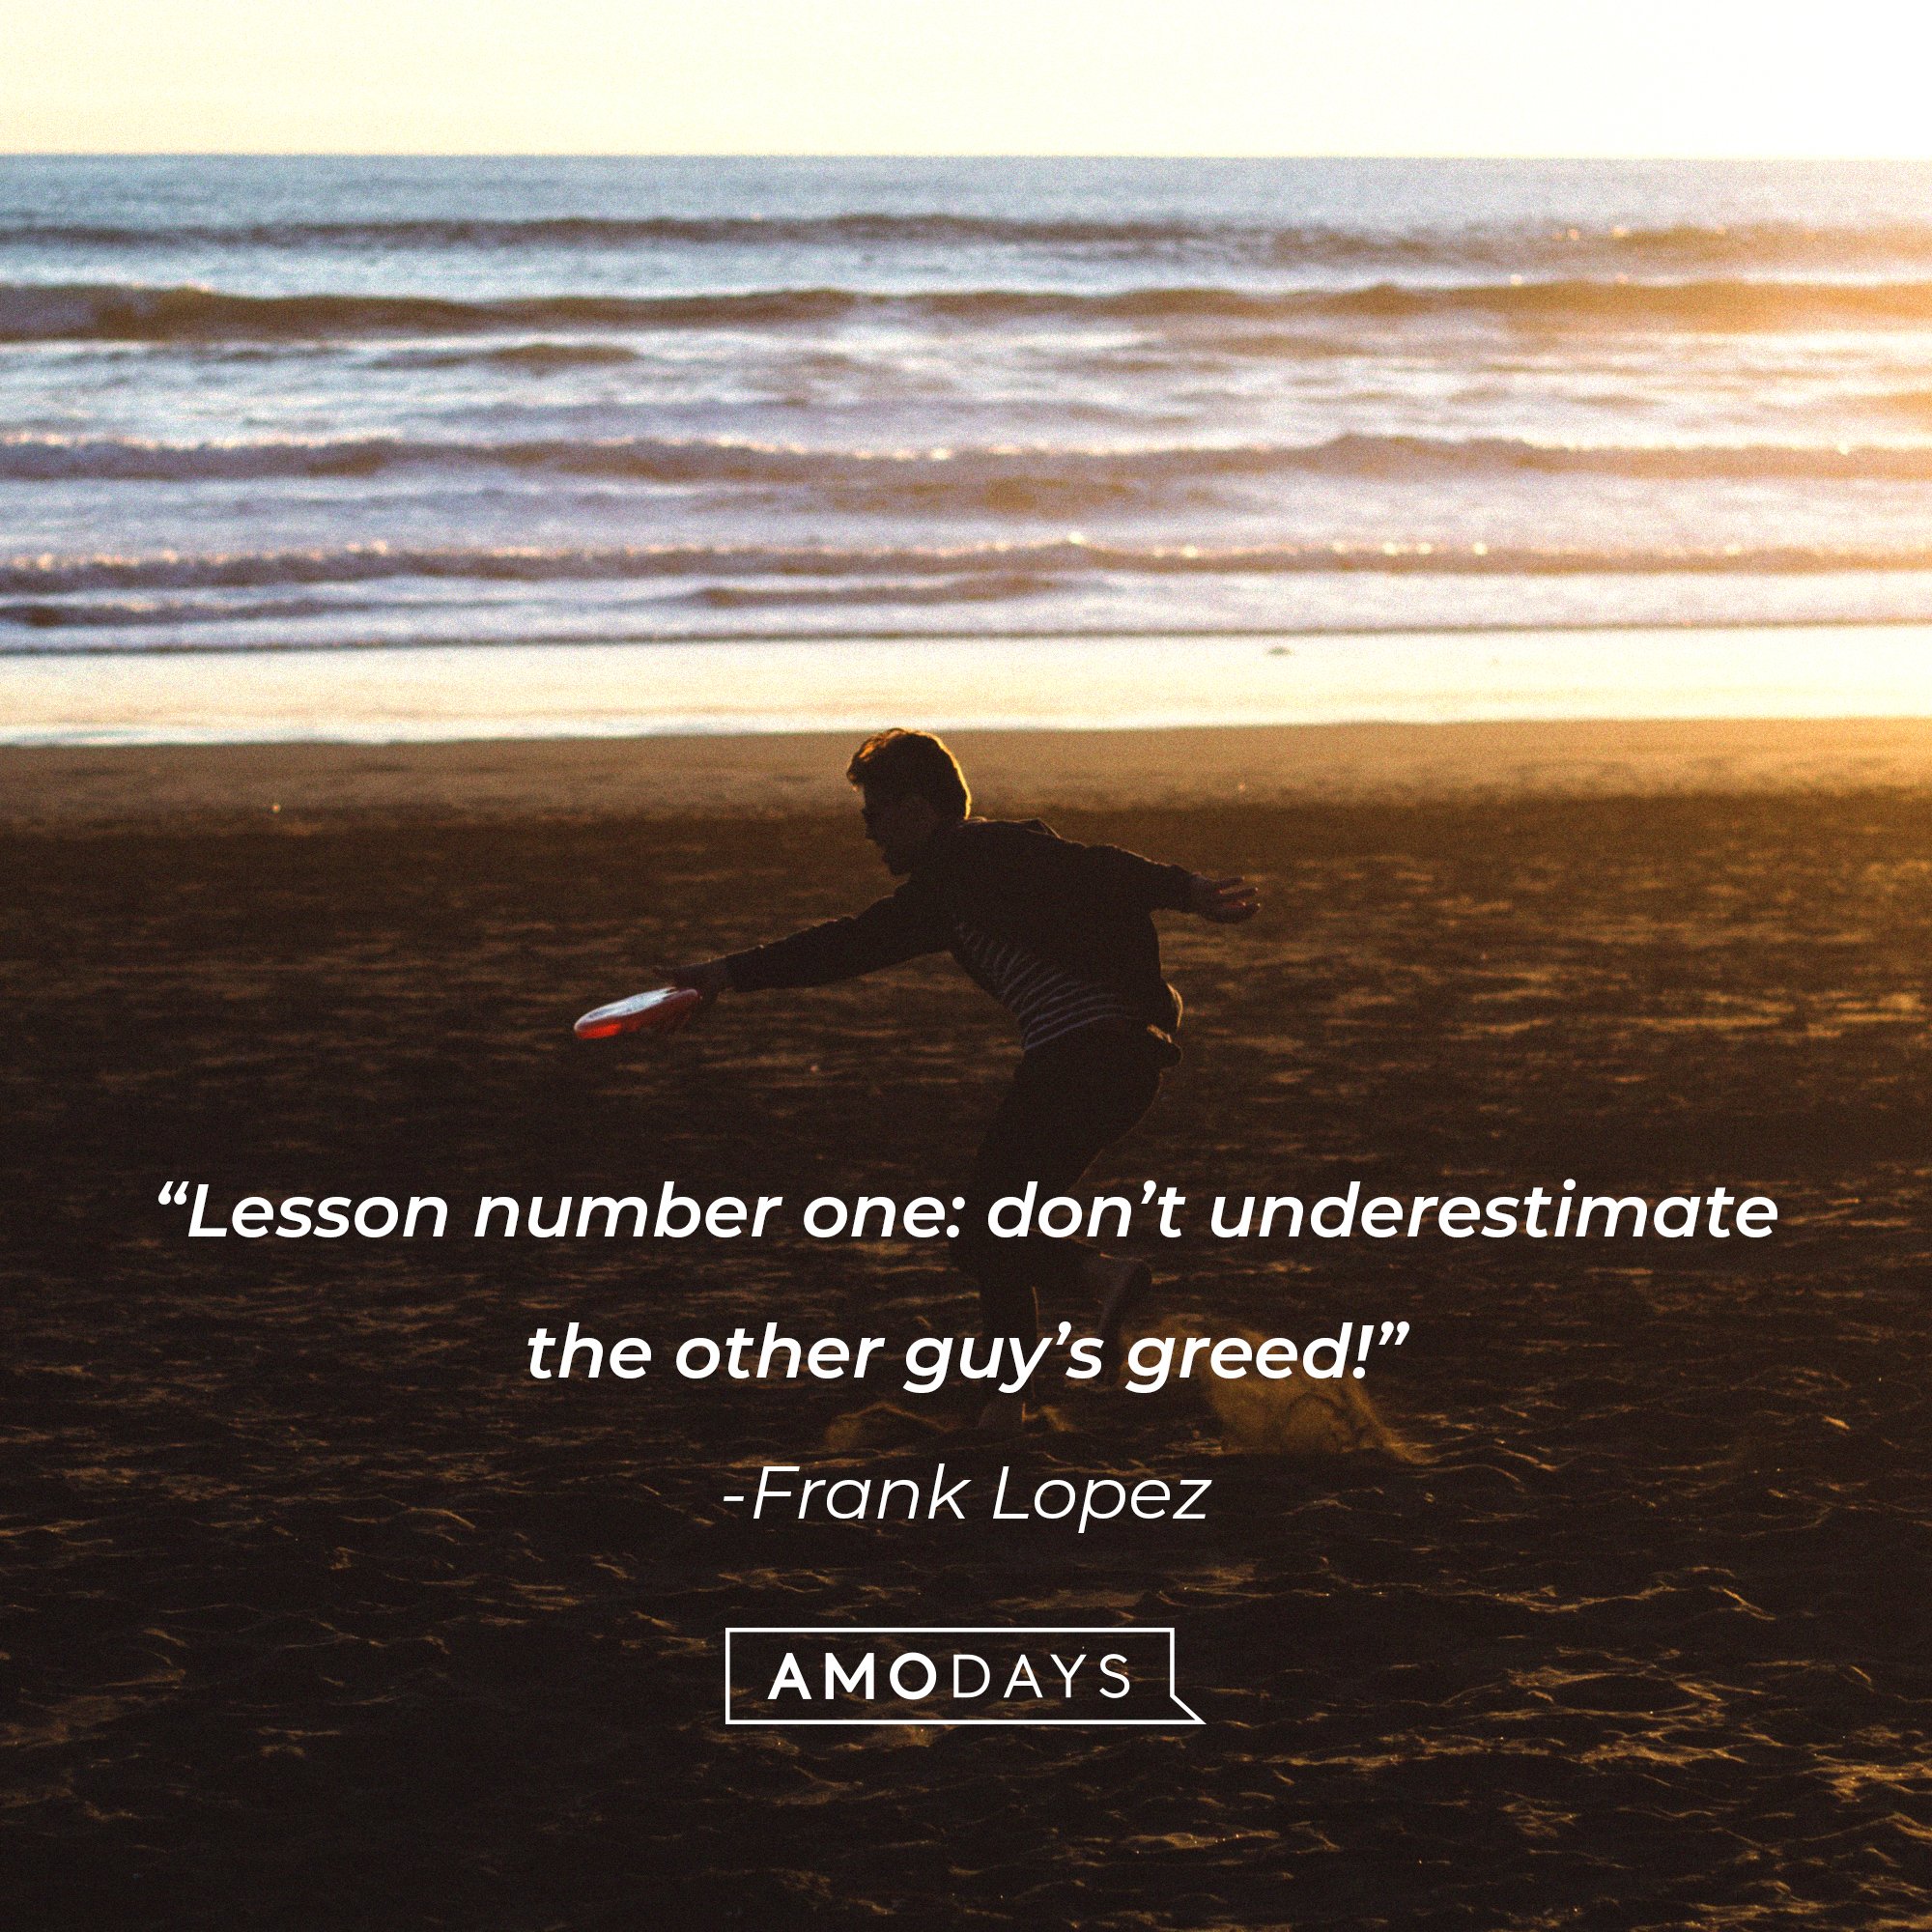 Frank Lopez’ quote: “Lesson number one: don’t underestimate the other guy’s greed!”  | Image: AmoDays